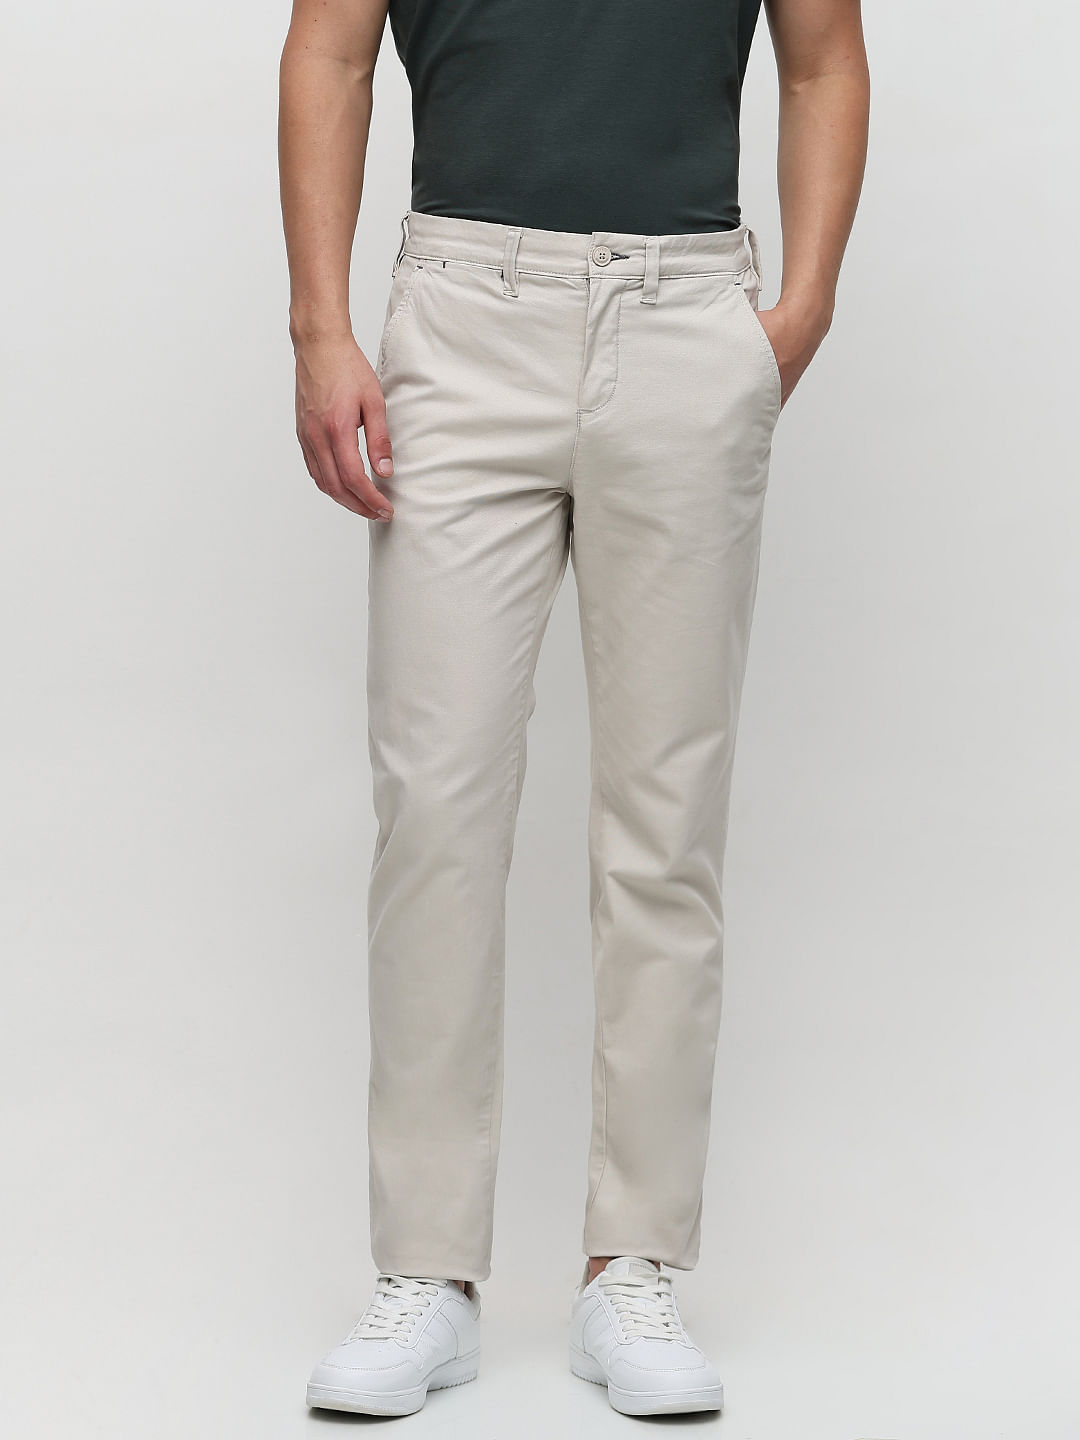 Buy Crimsoune Club Men Off-White Trousers in Slim Fit (30) at Amazon.in